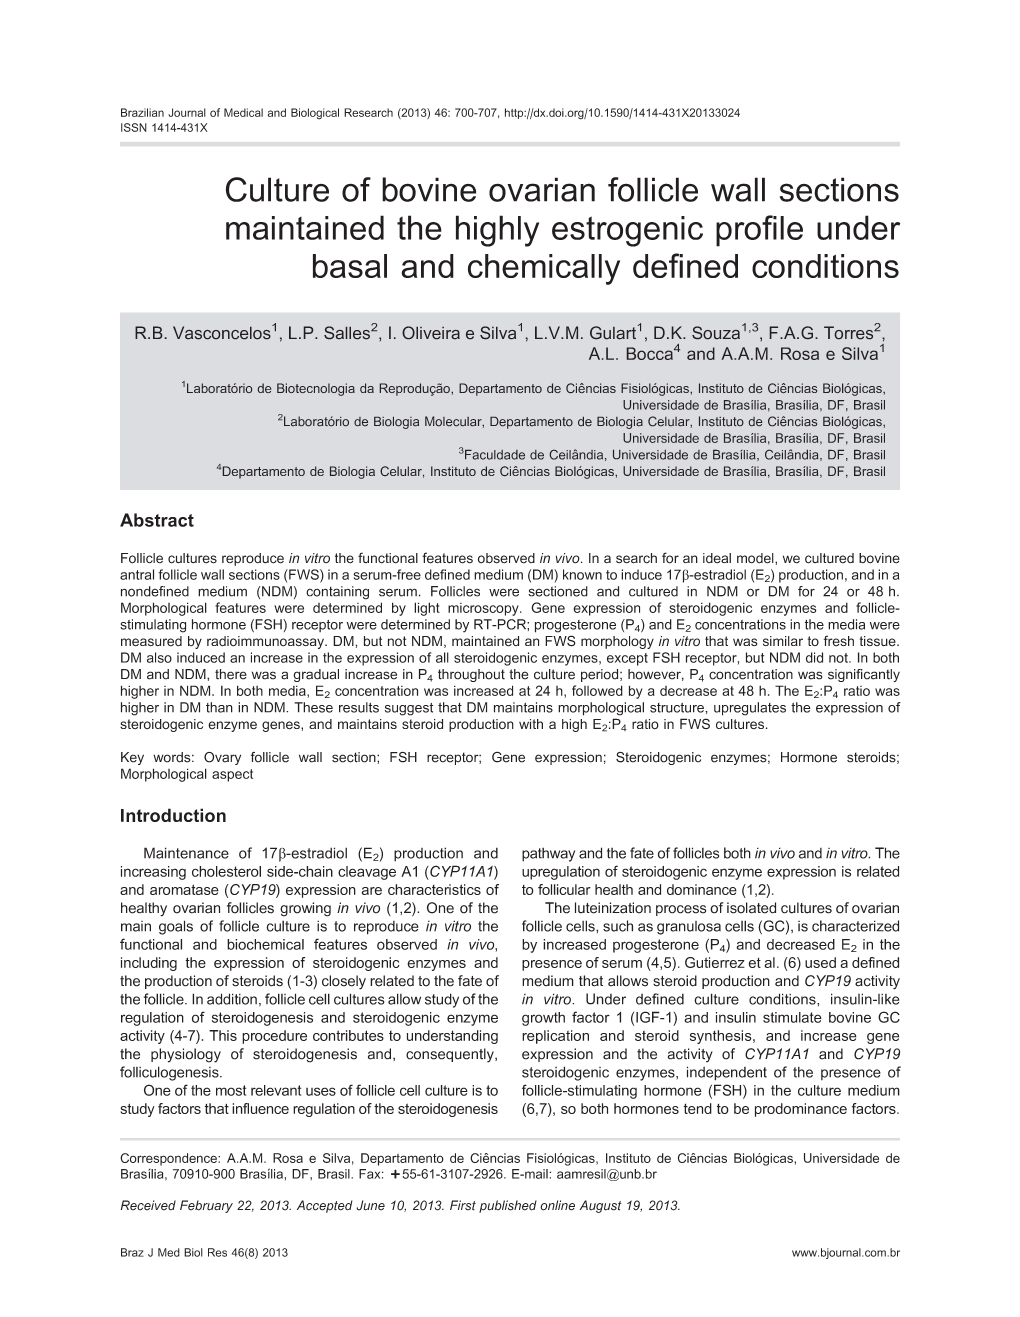 Culture of Bovine Ovarian Follicle Wall Sections Maintained the Highly Estrogenic Profile Under Basal and Chemically Defined Conditions